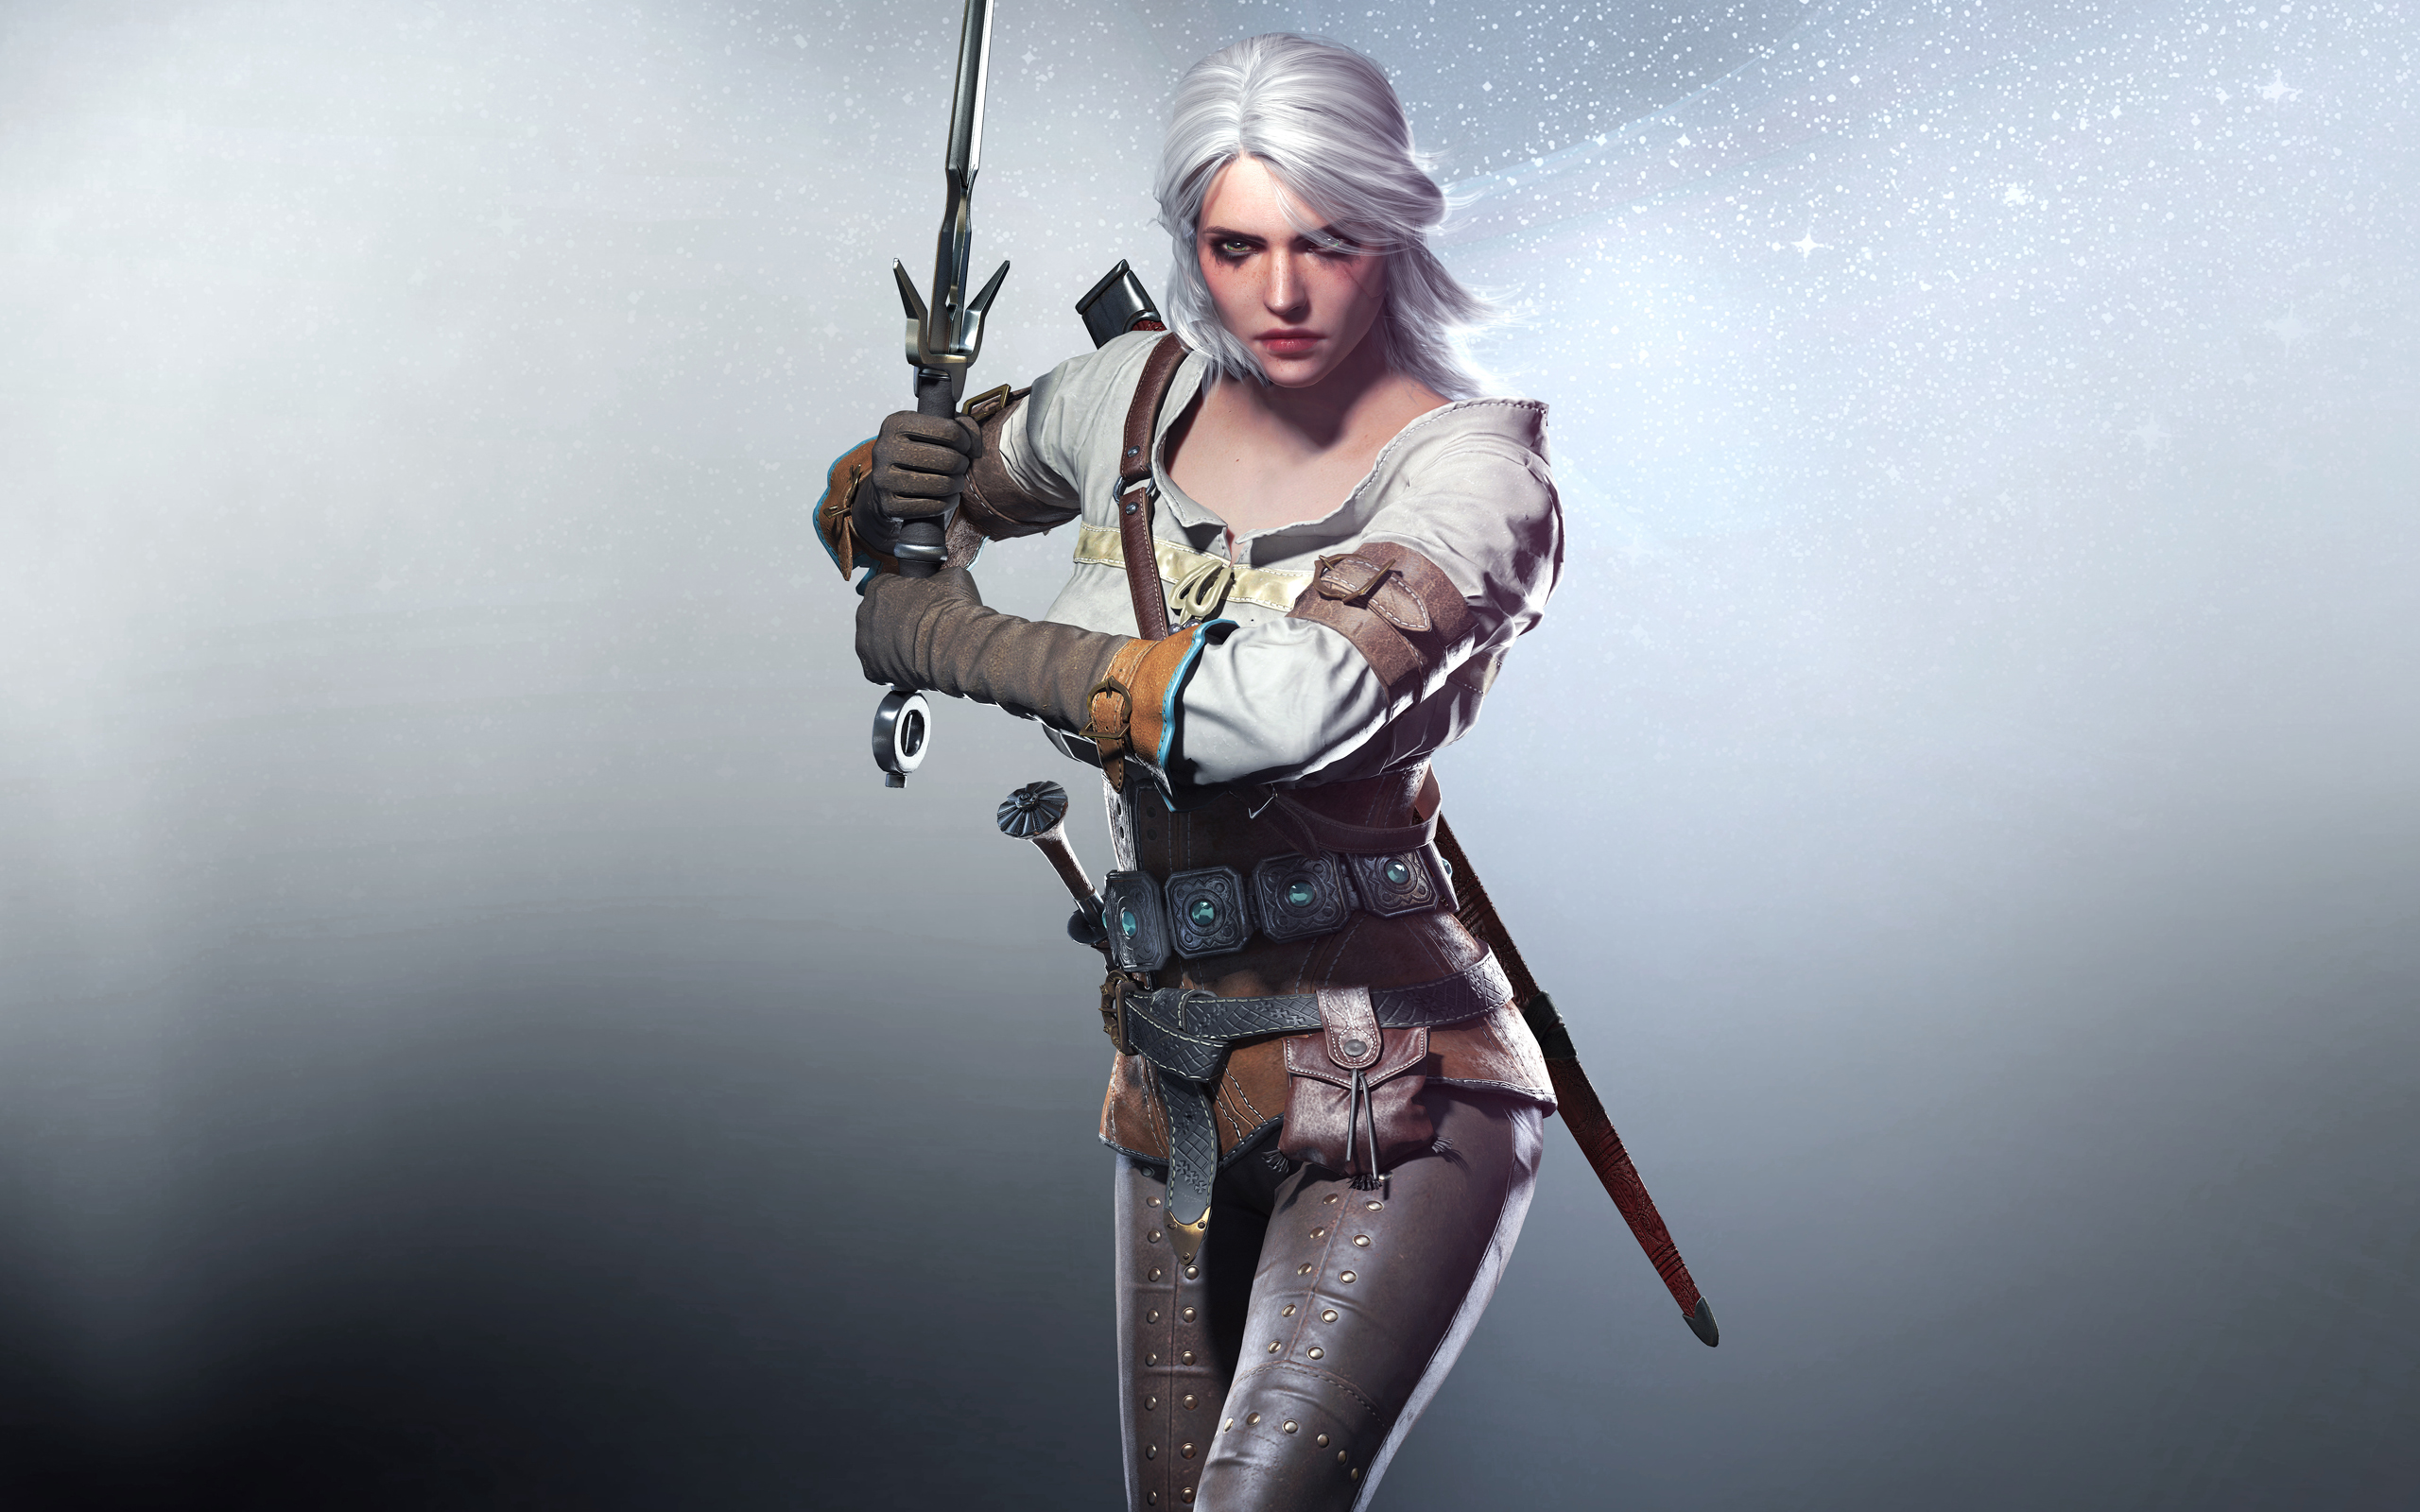 High Resolution Wallpaper | The Witcher 2560x1600 px